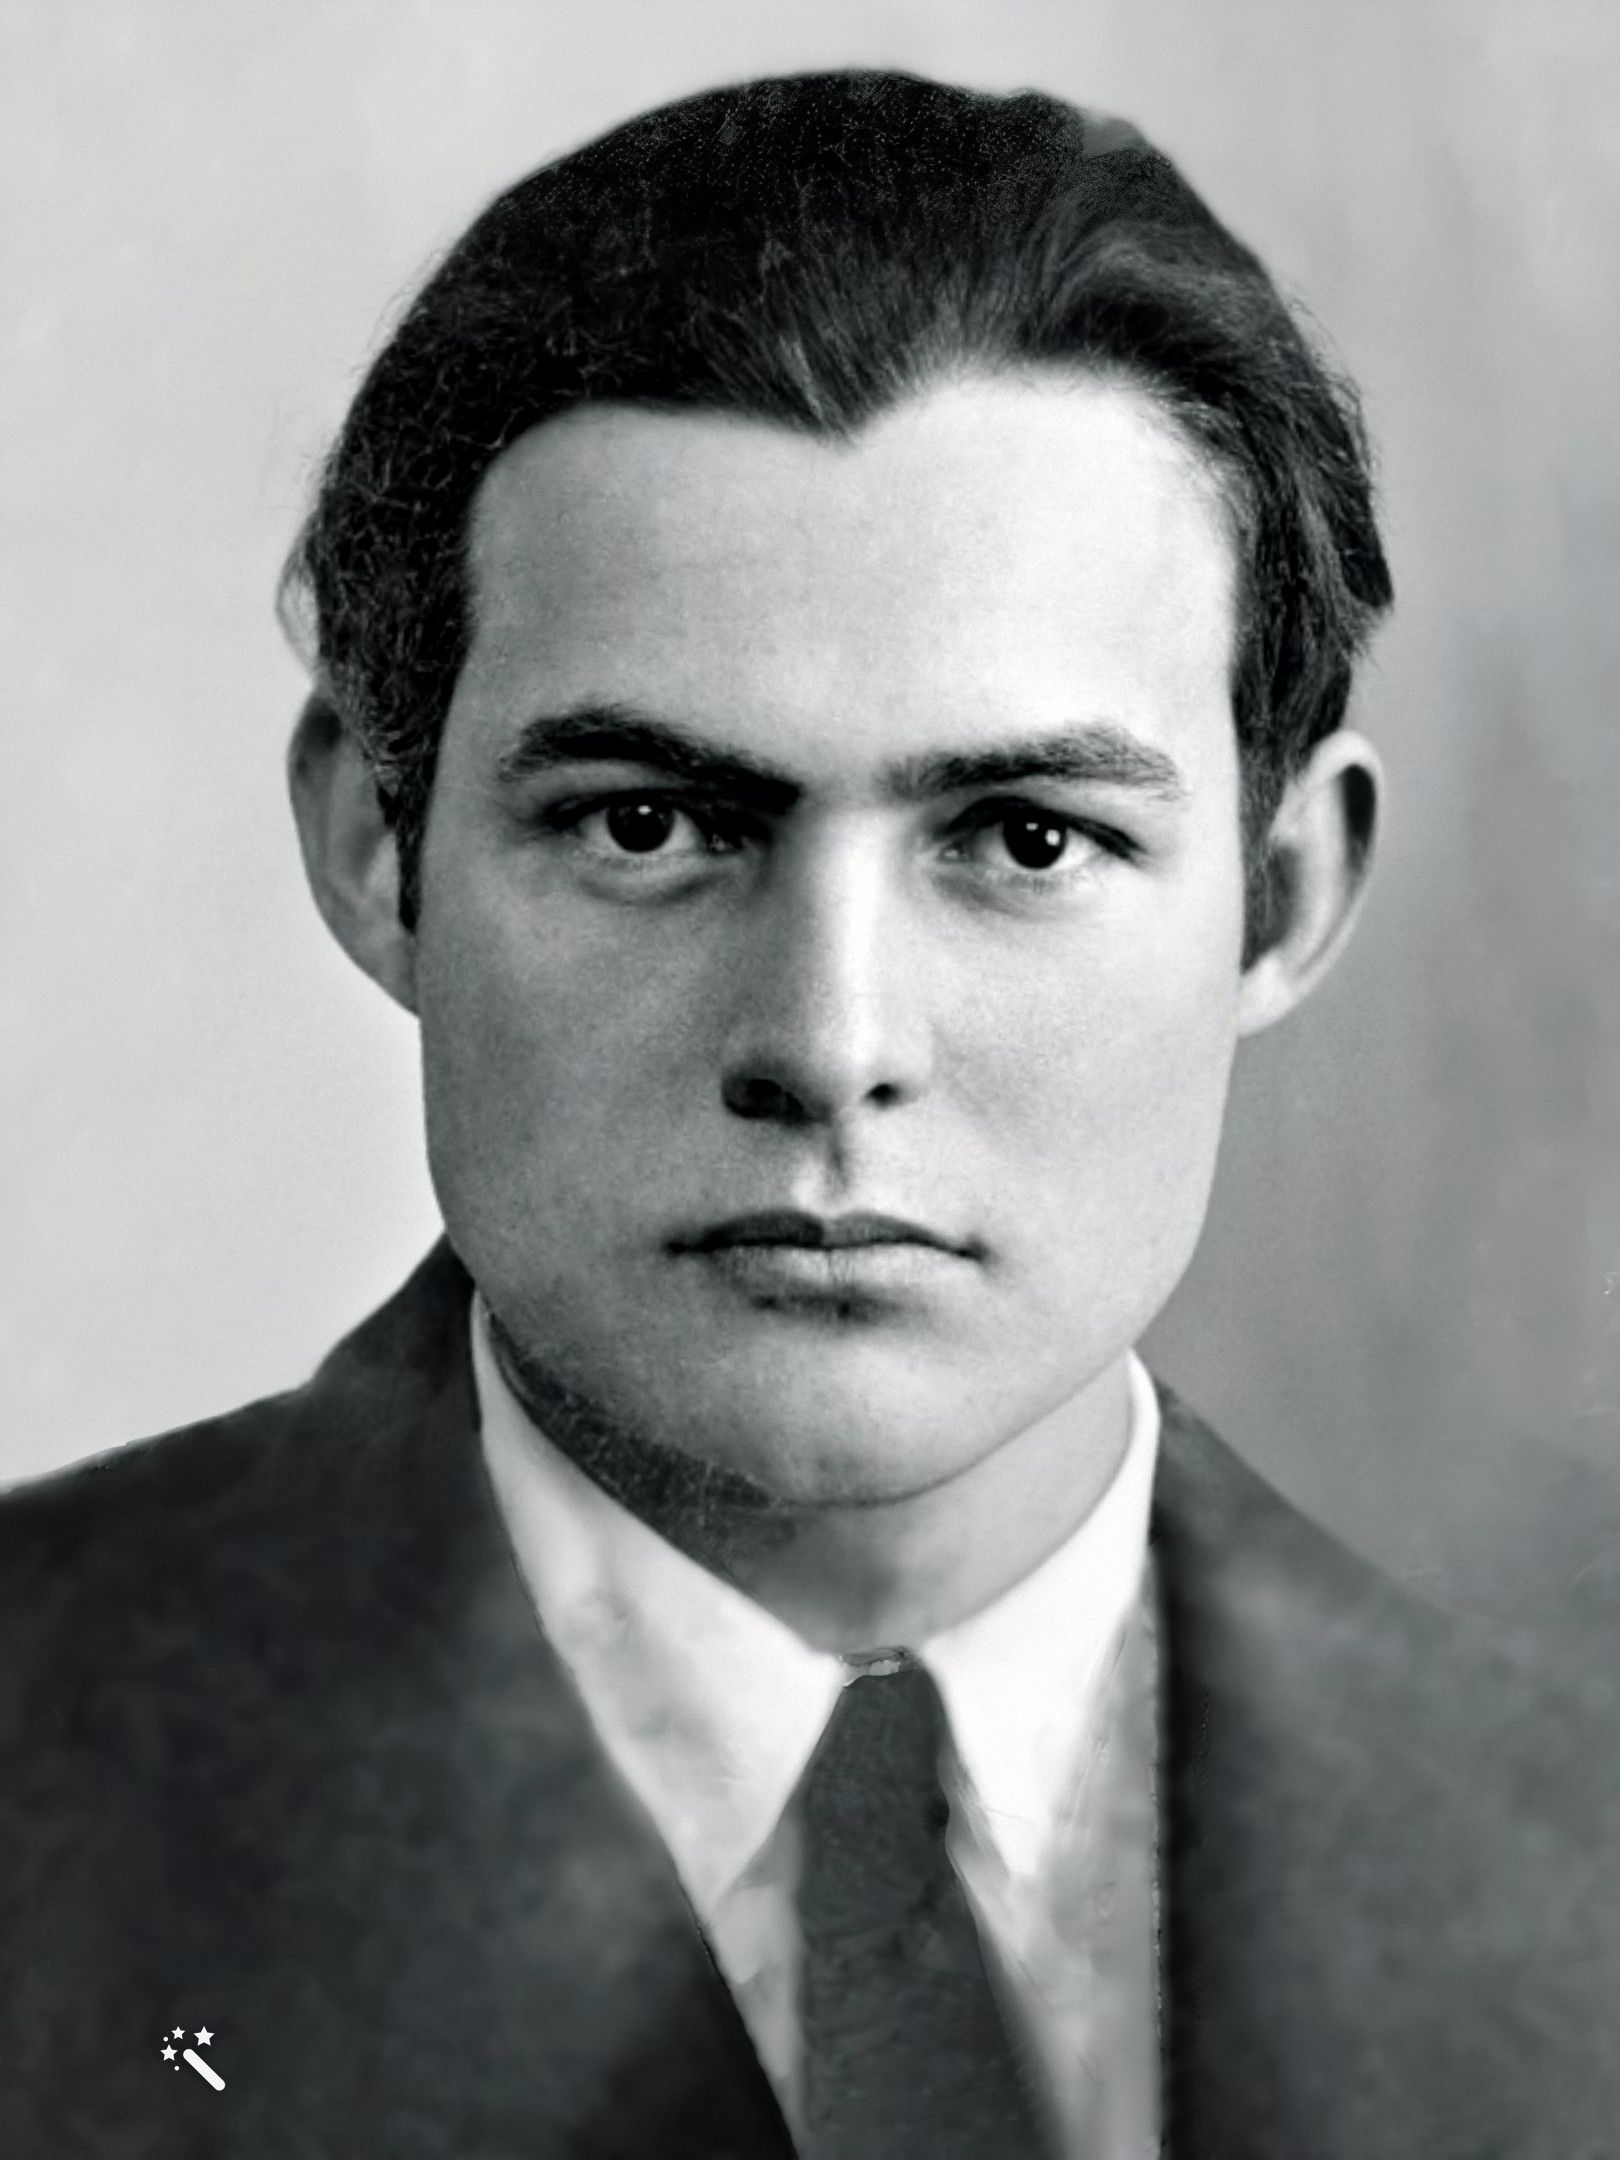 Ernest Hemingway's passport photo, colorized and enhanced by MyHeritage